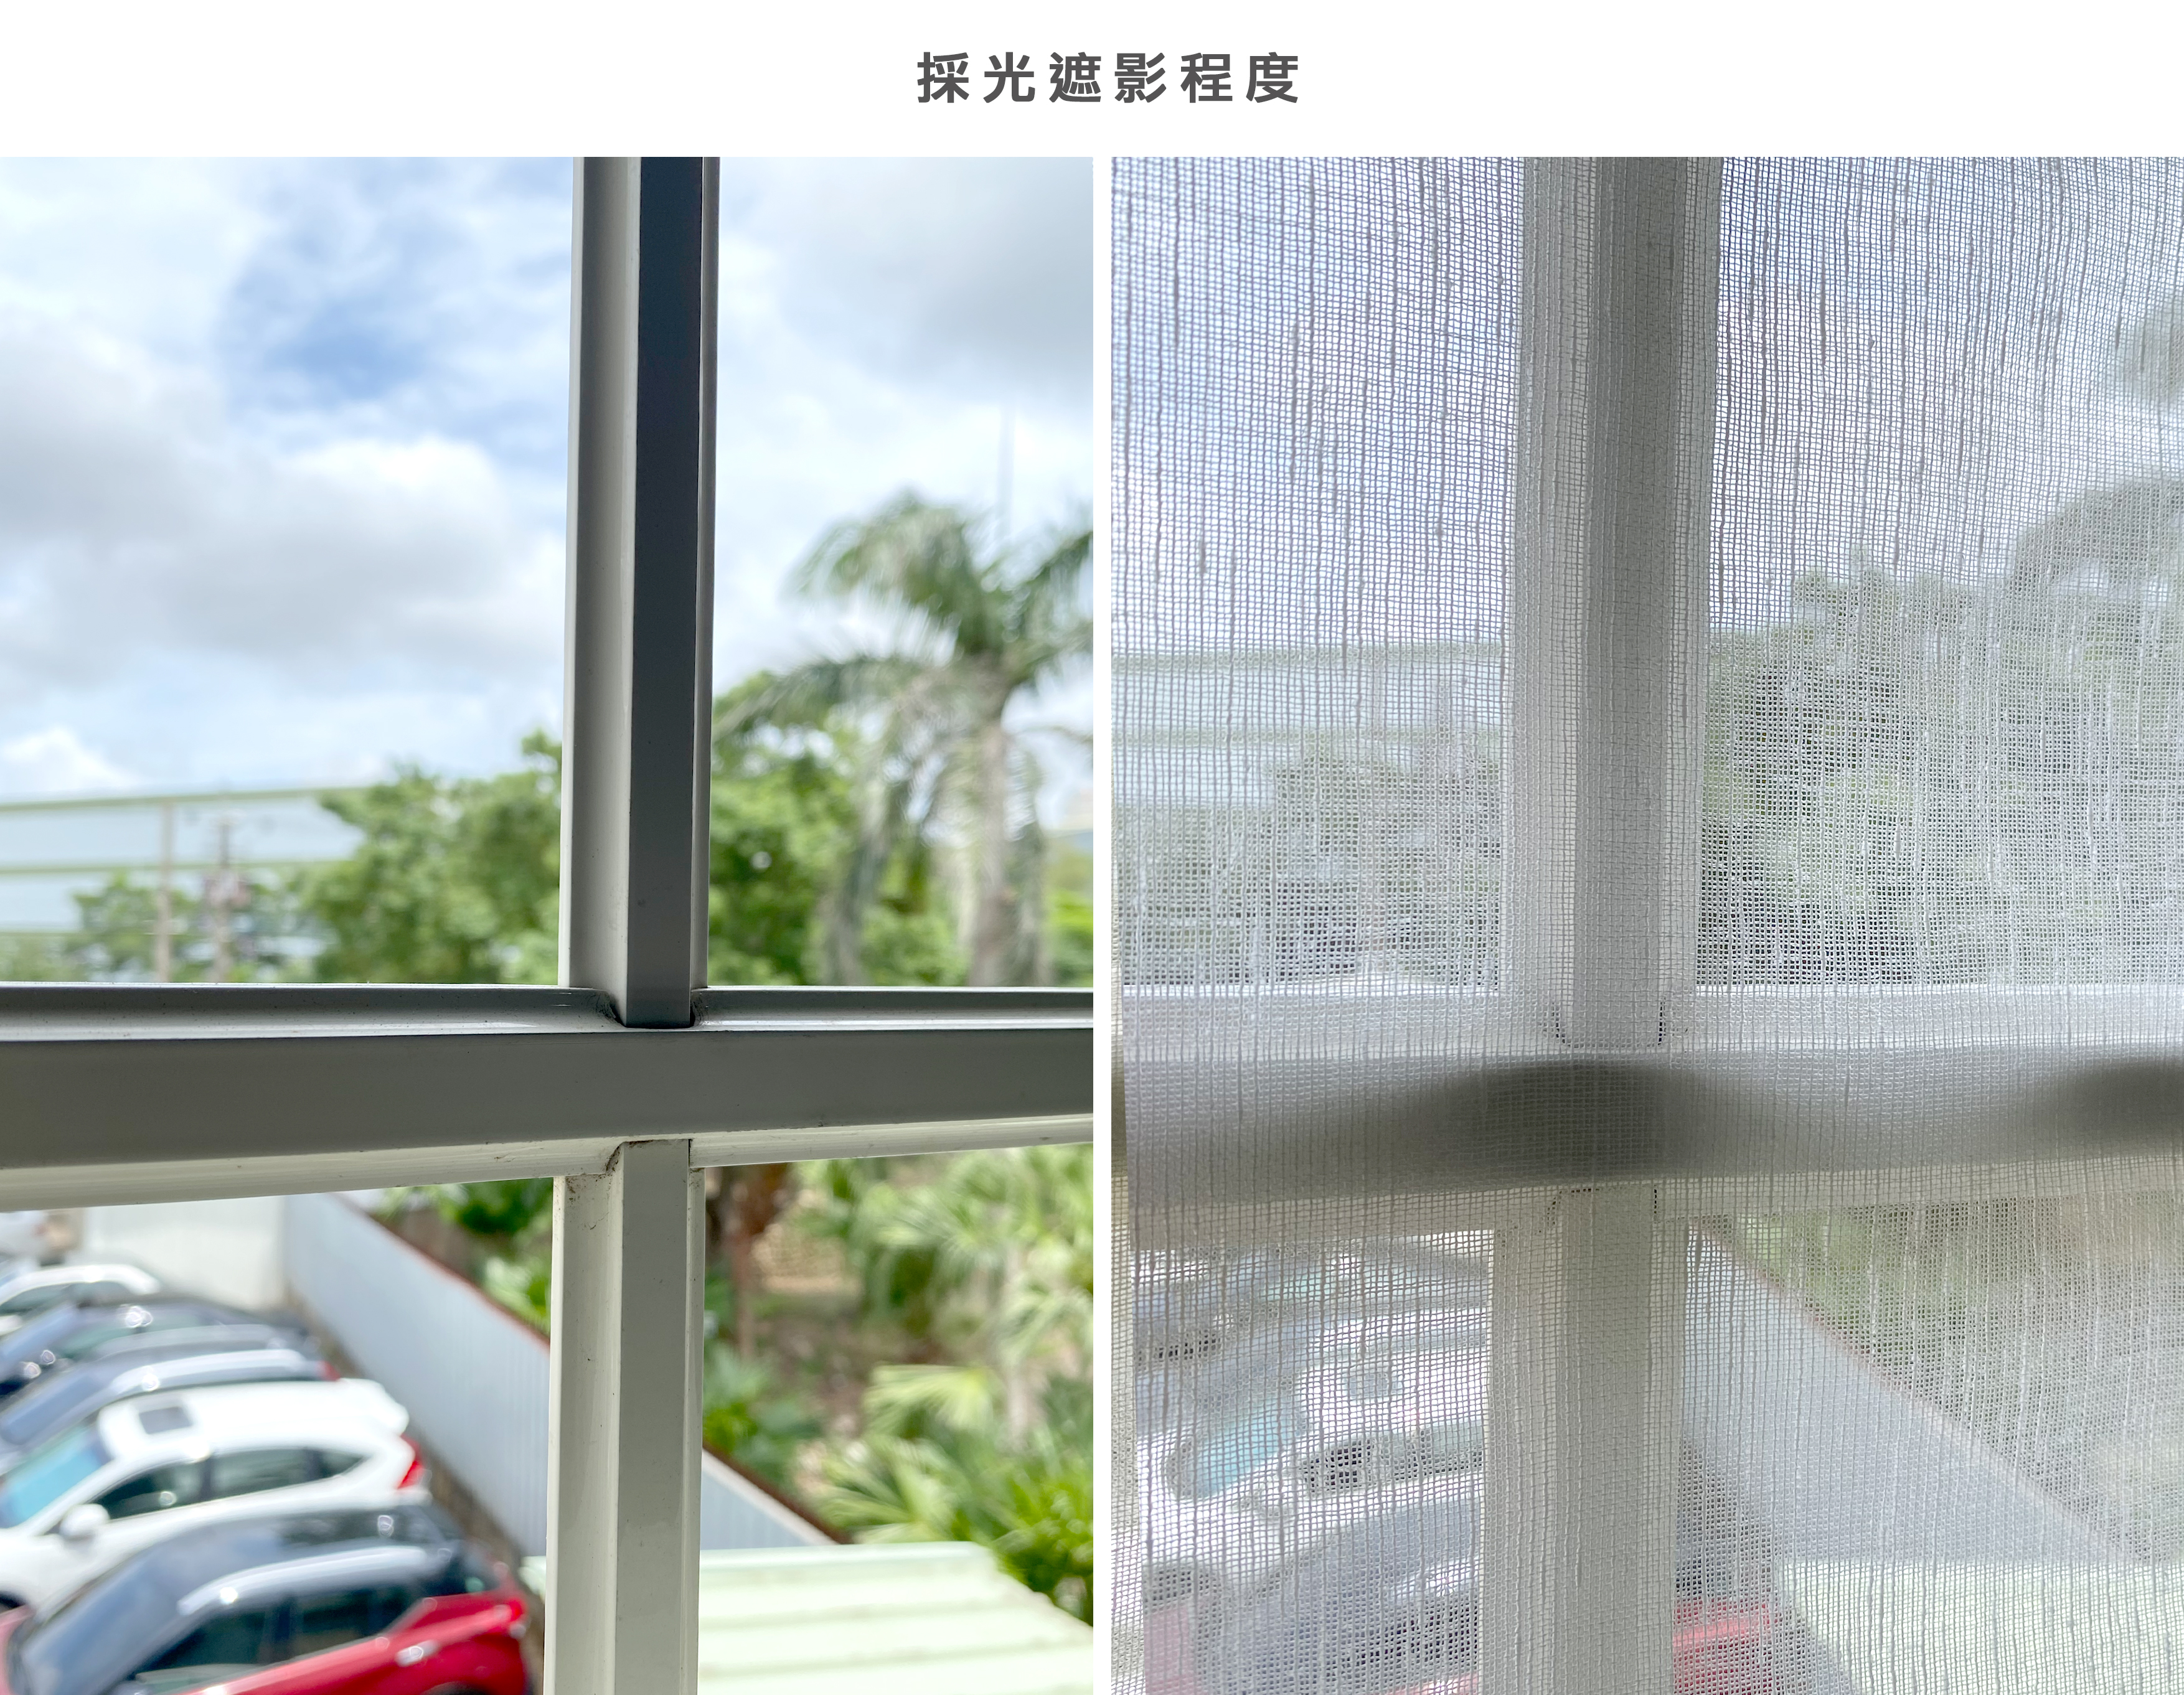 Lo-Fi House Select Curtains　Sheer Linen Sheer - Cream Motorized Blinds／Smart Blinds & Shades Child Safety／Cordless Blinds & Shades Light Filtering Blinds & Shades Semi-Transparent Blinds & Shades